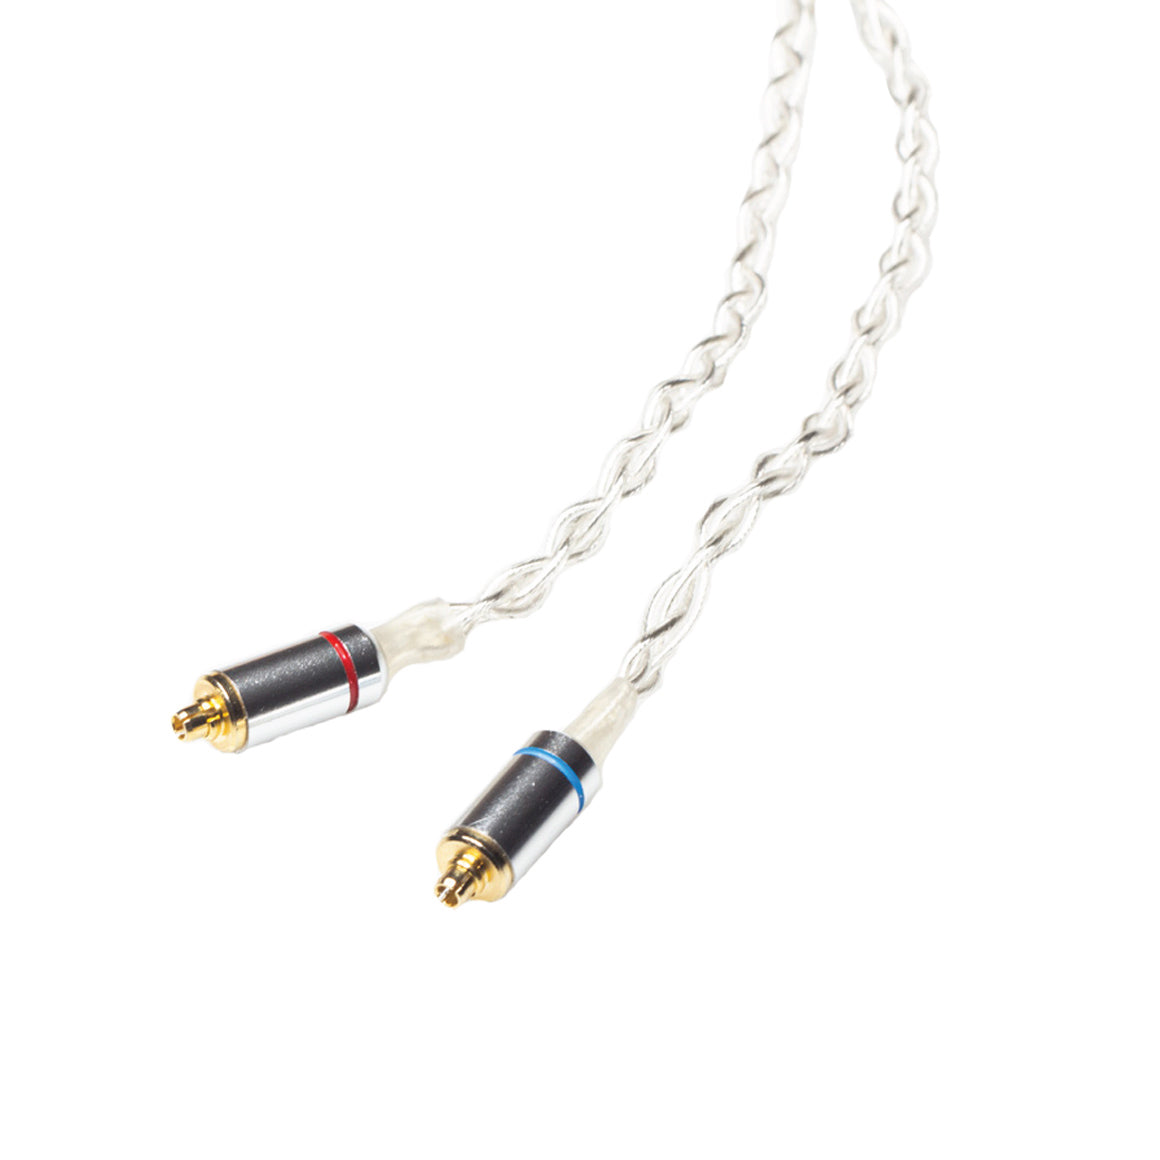 Headphone Zone - Balanced MMCX Cable for IEM